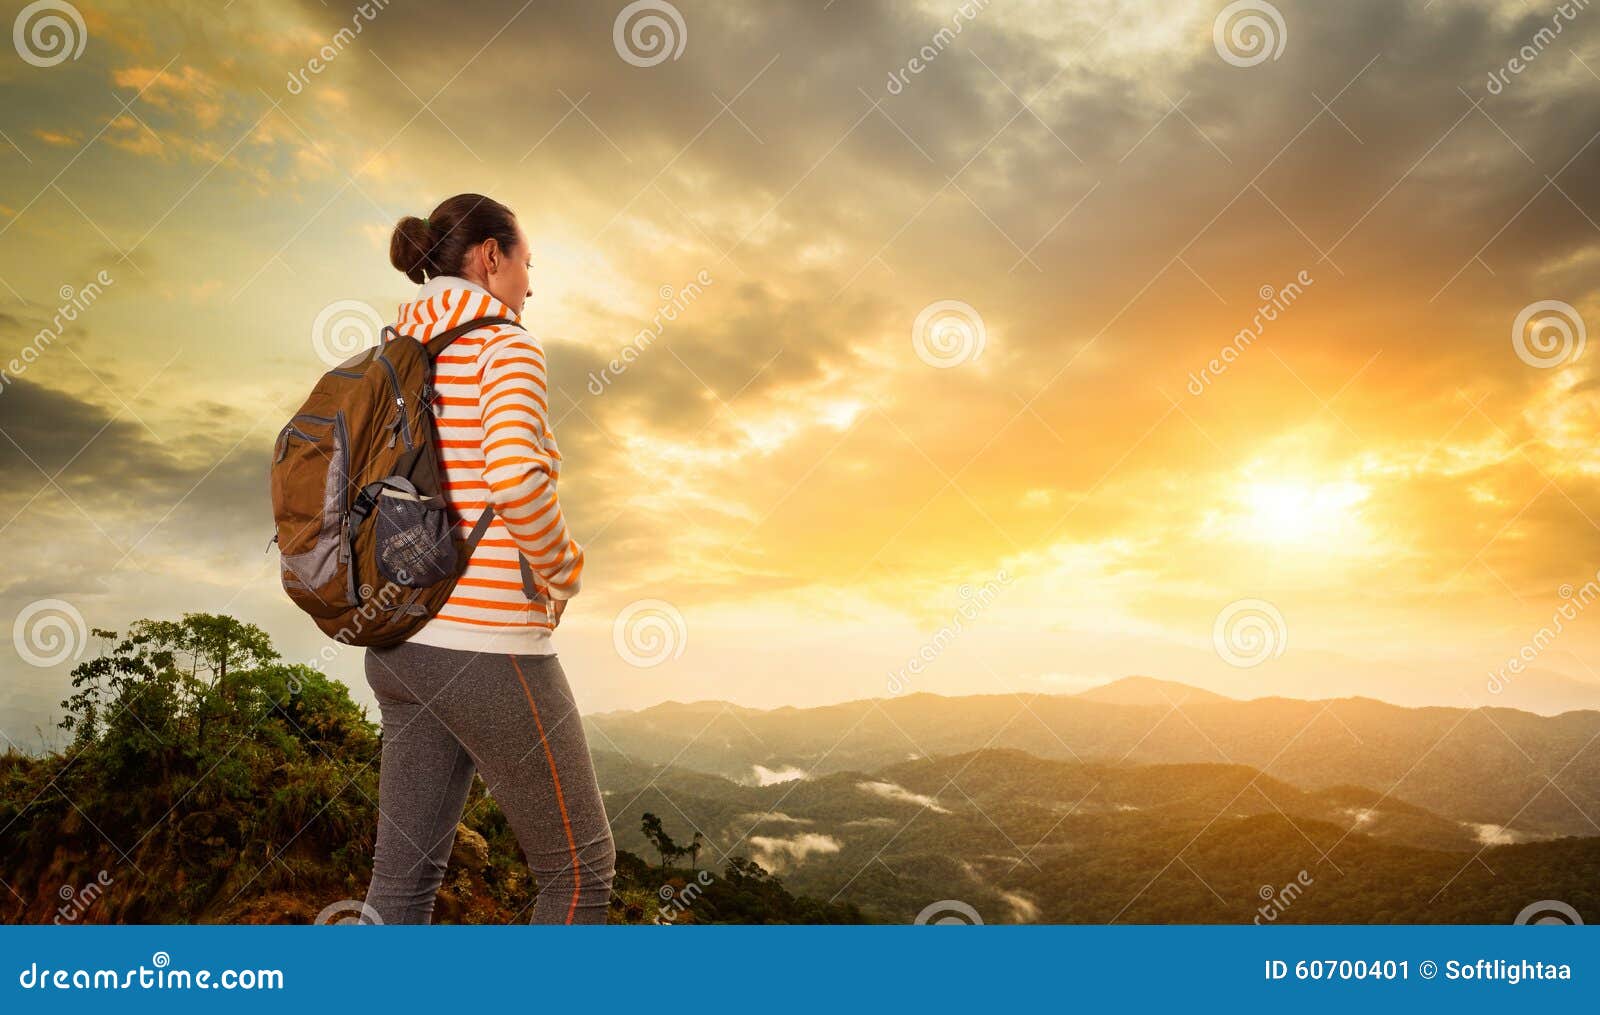 woman backpacker traveling with backpack standing on top of the